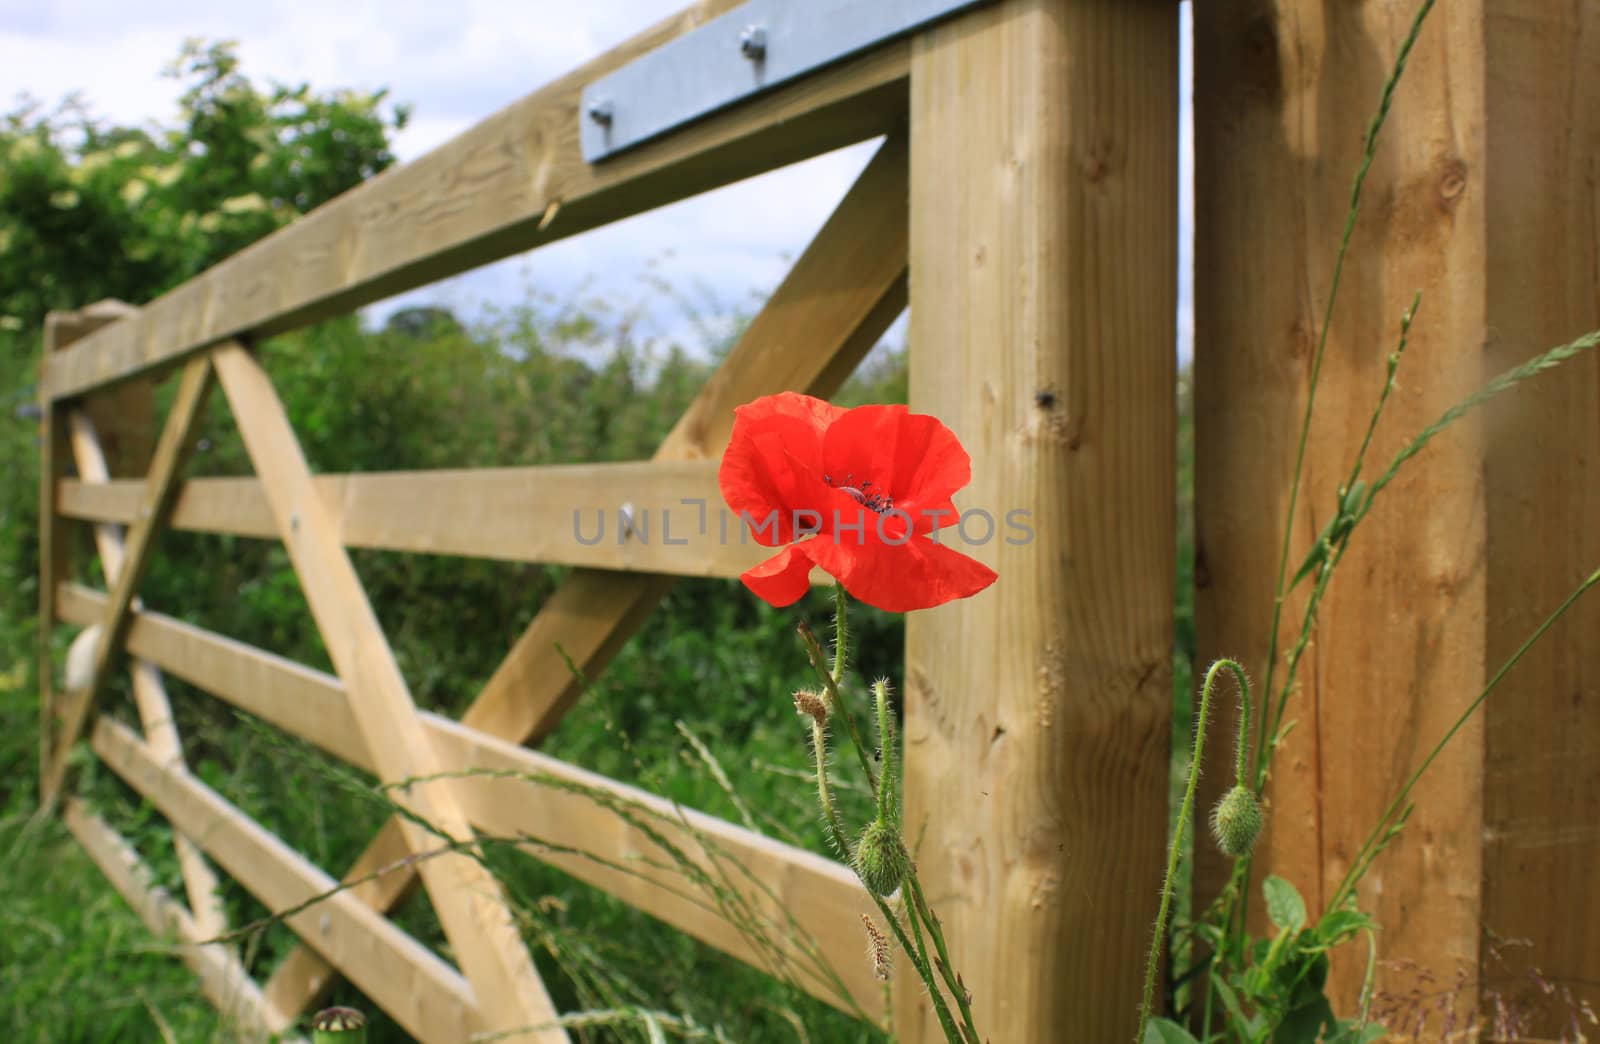 A single red poppie growing next to a five bar wooden farm gate.